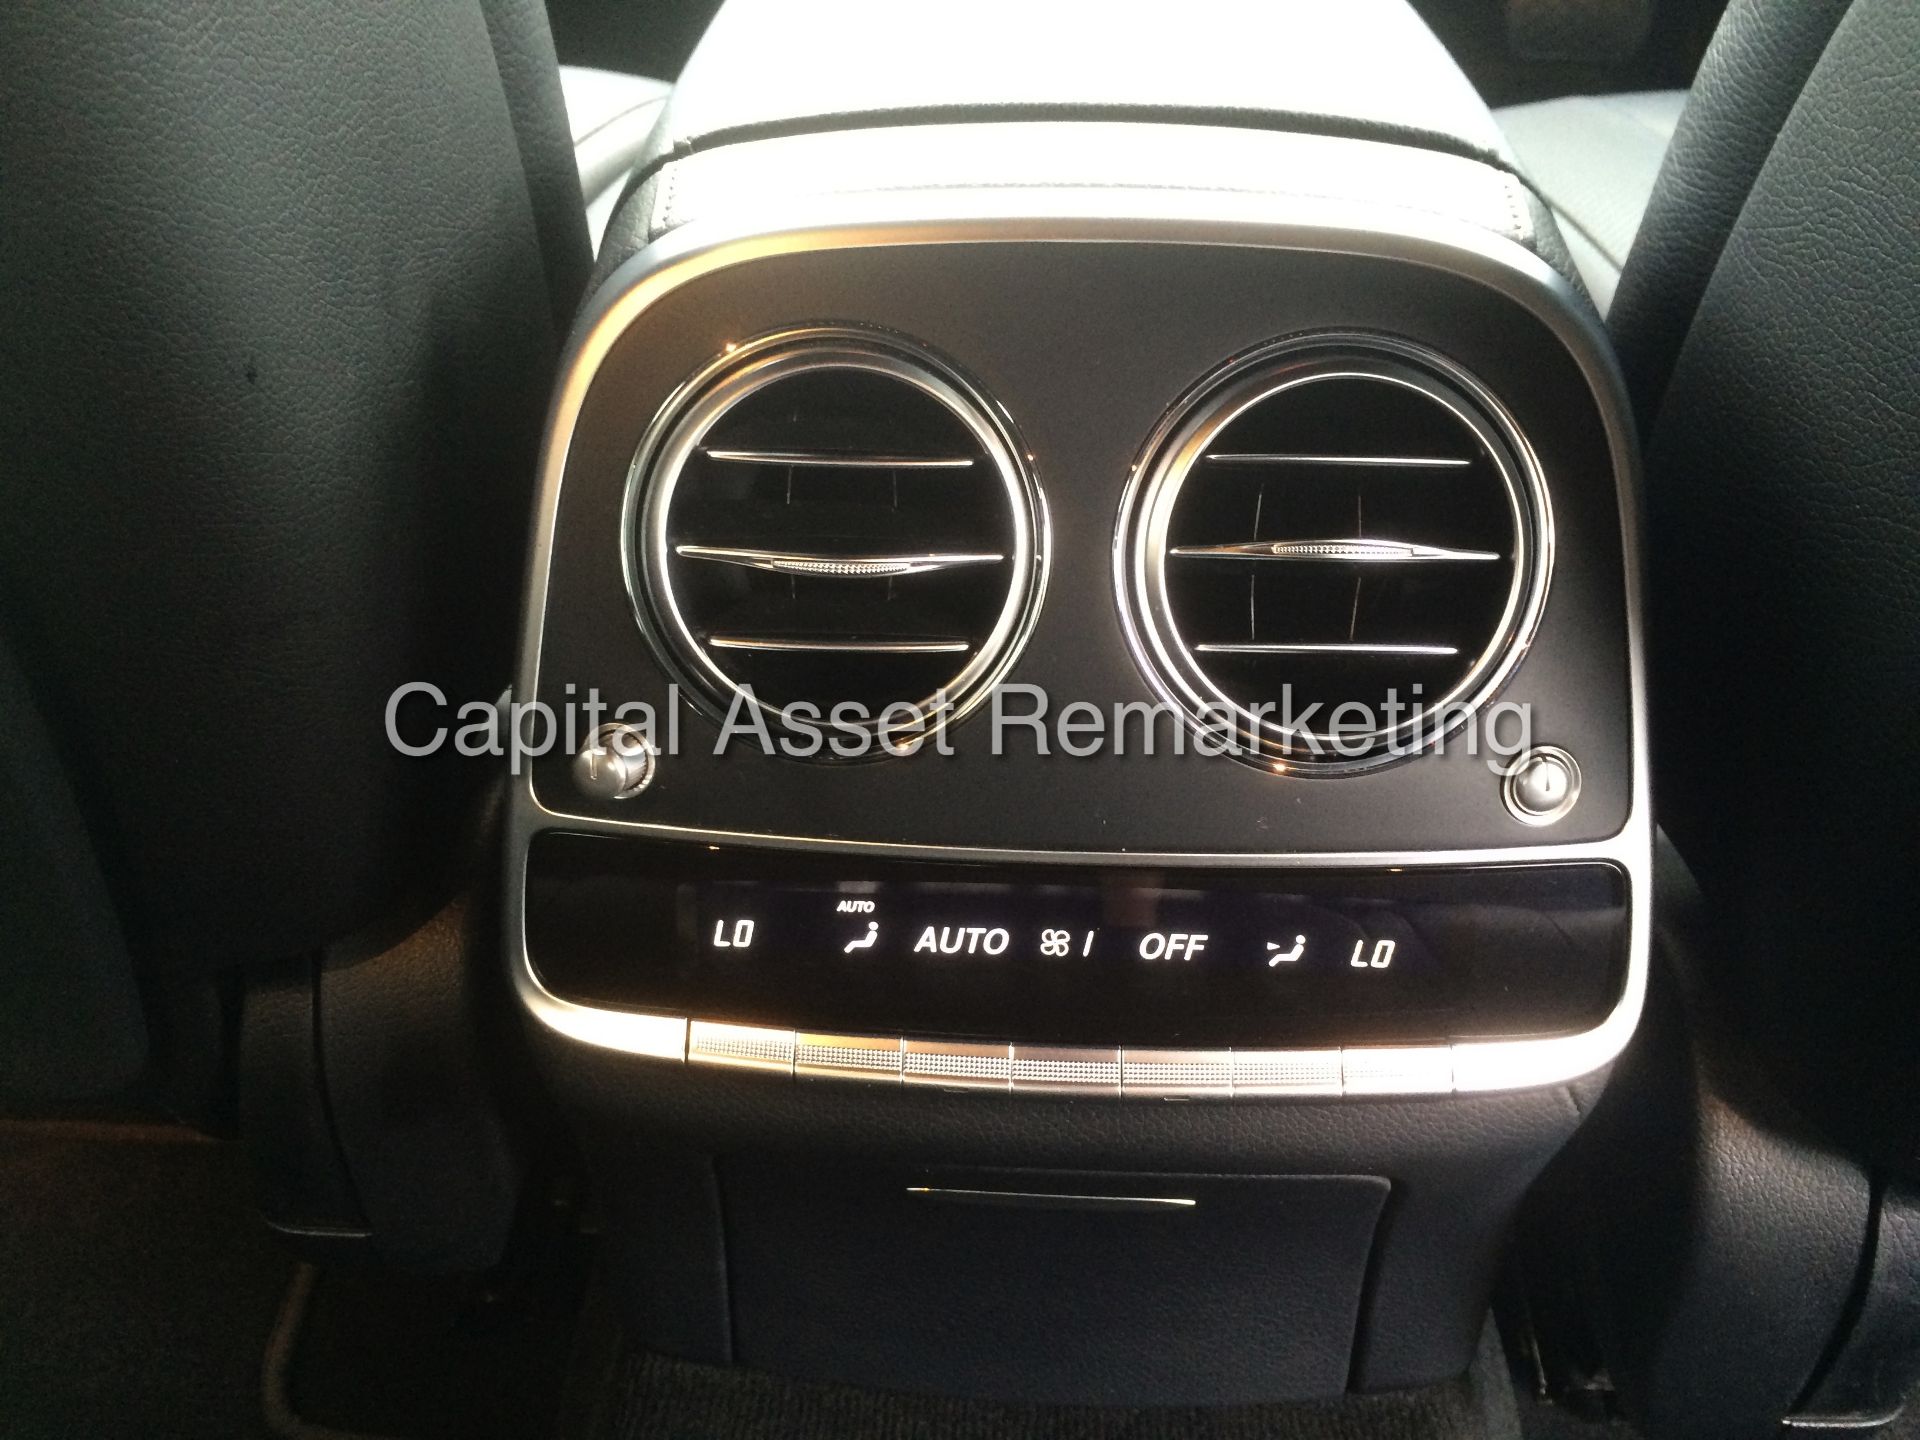 (ON SALE) MERCEDES S350CDI "LIMO - SE EXCLUSIVE" FULLY LOADED (15 REG - NEW SHAPE -ADD BLUE) COMMAND - Image 31 of 32